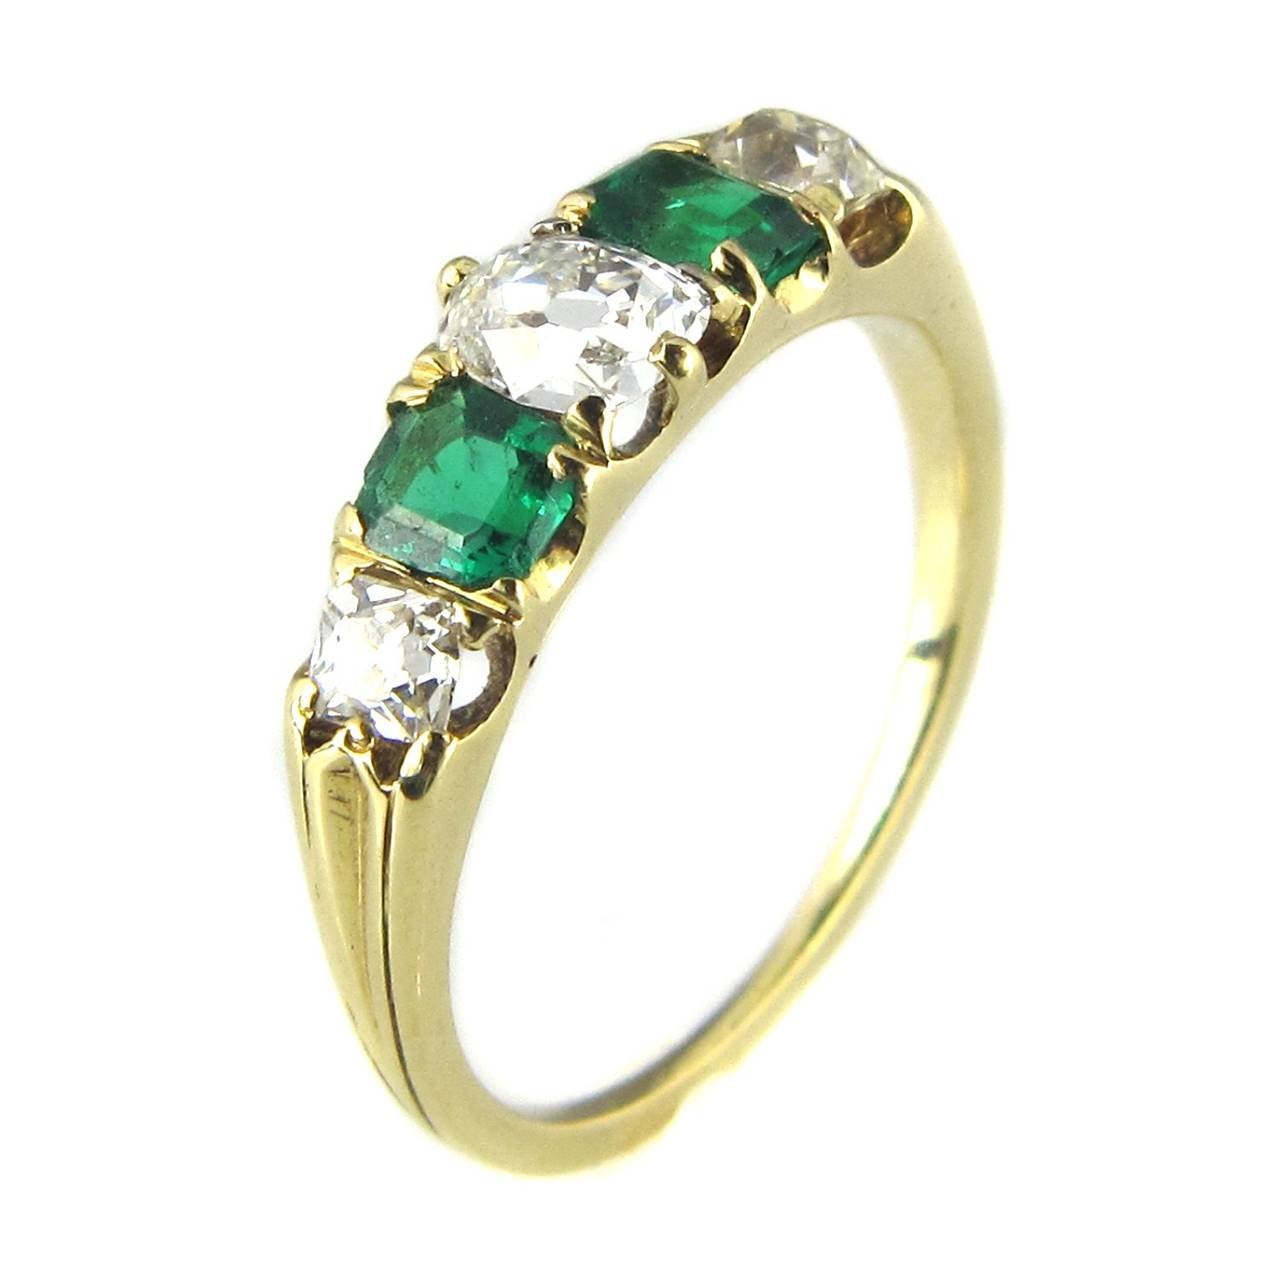 An antique late Victorian five stone emerald and diamond ring, comprising three graduated old cushion cut diamonds, estimated to weigh0.90 carats in total and two emerald-cut emeralds, estimated to weigh 0.50 carats.  The stones are claw set in an